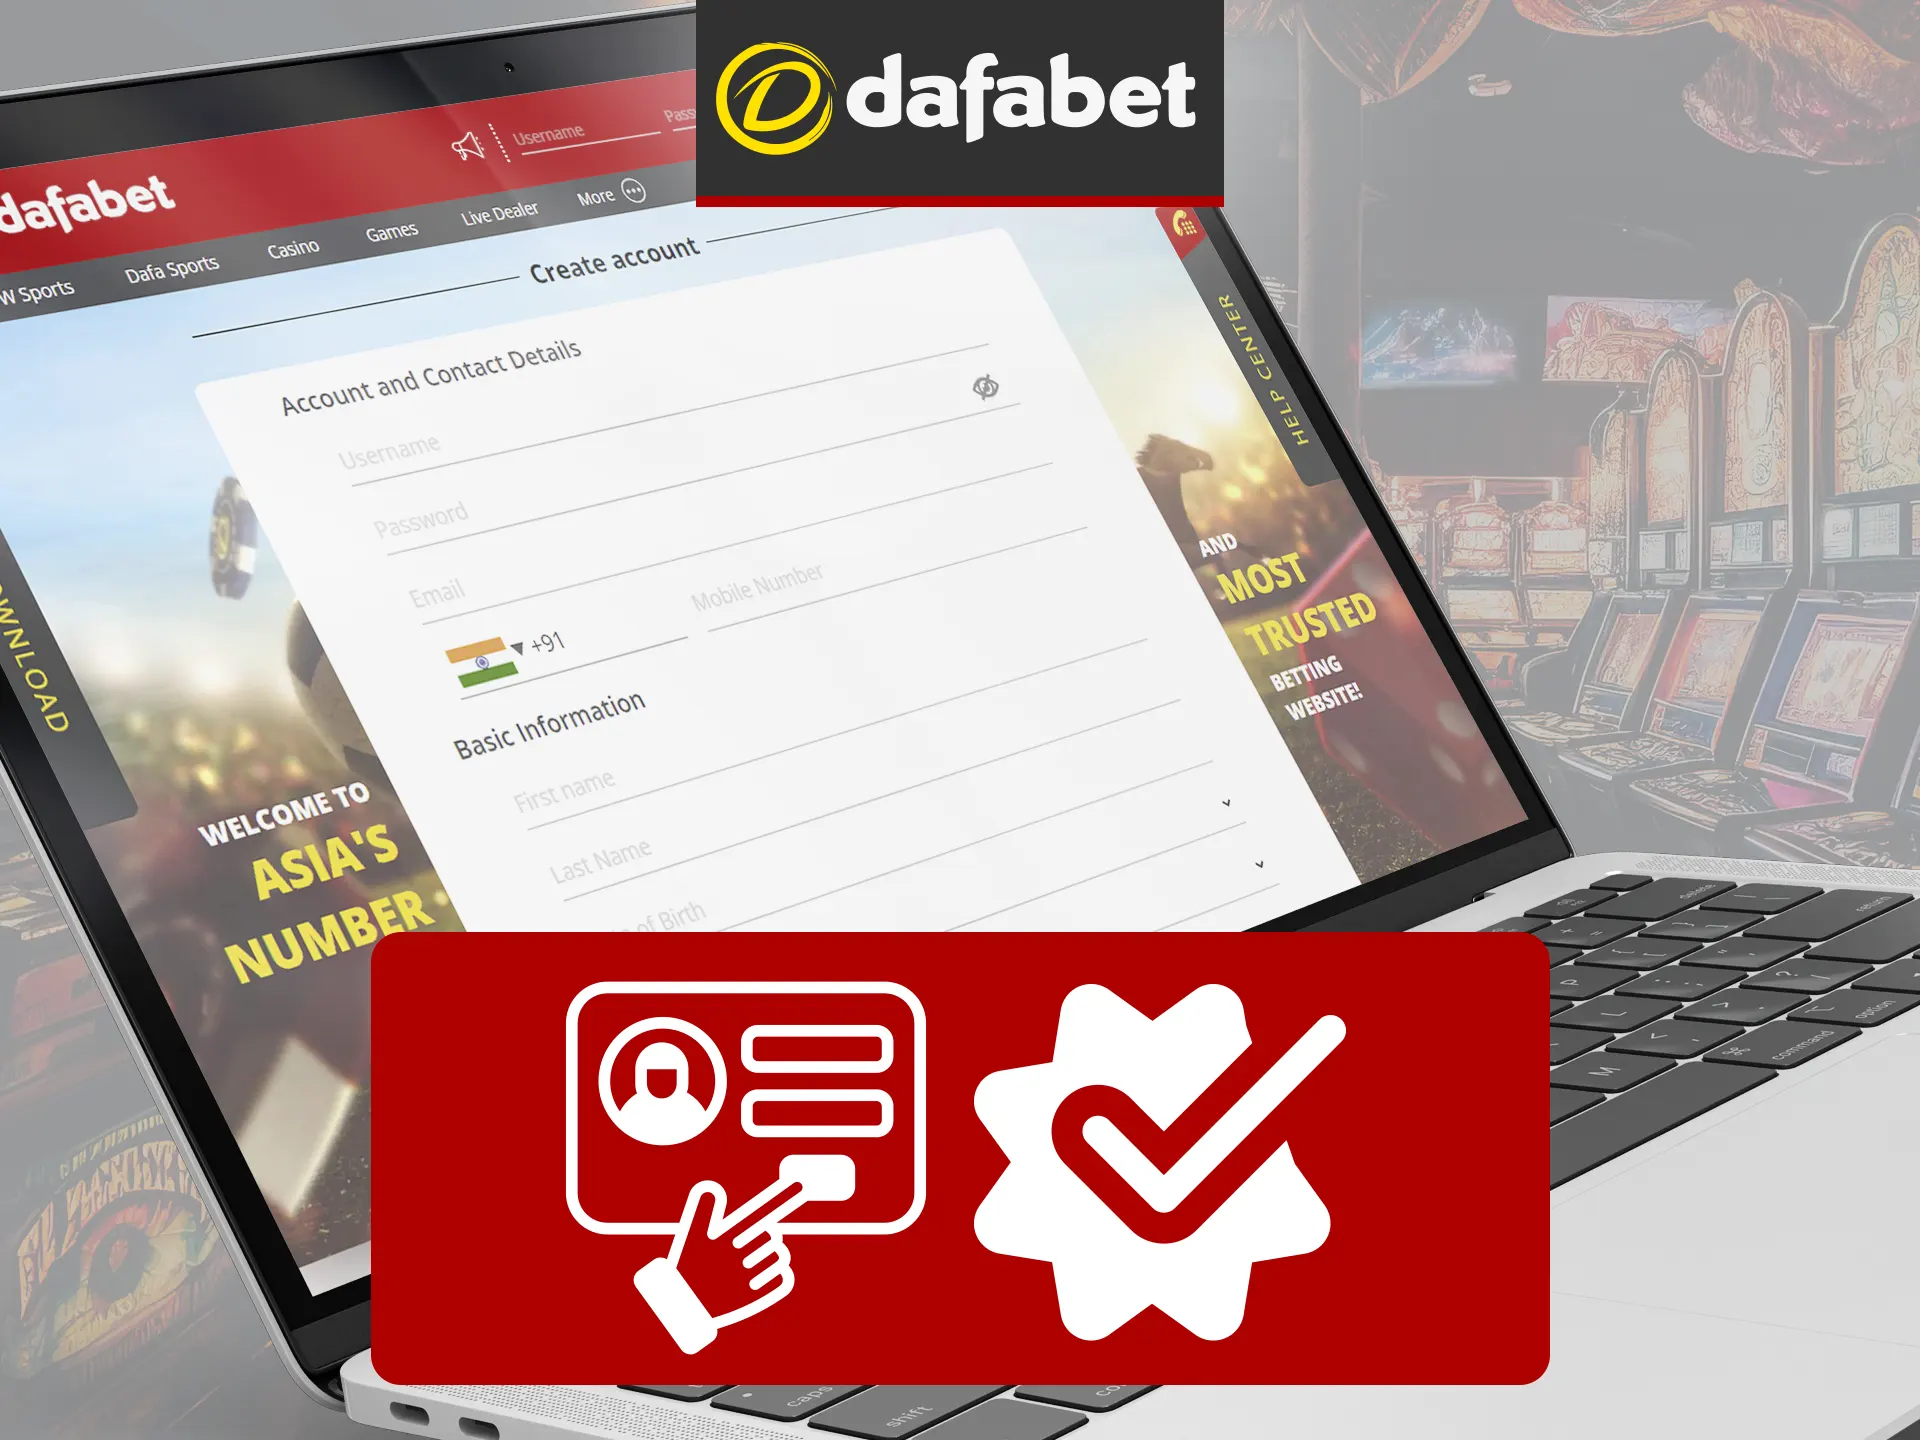 Follow the straightforward process in the upper corner to register and verify at Dafabet.